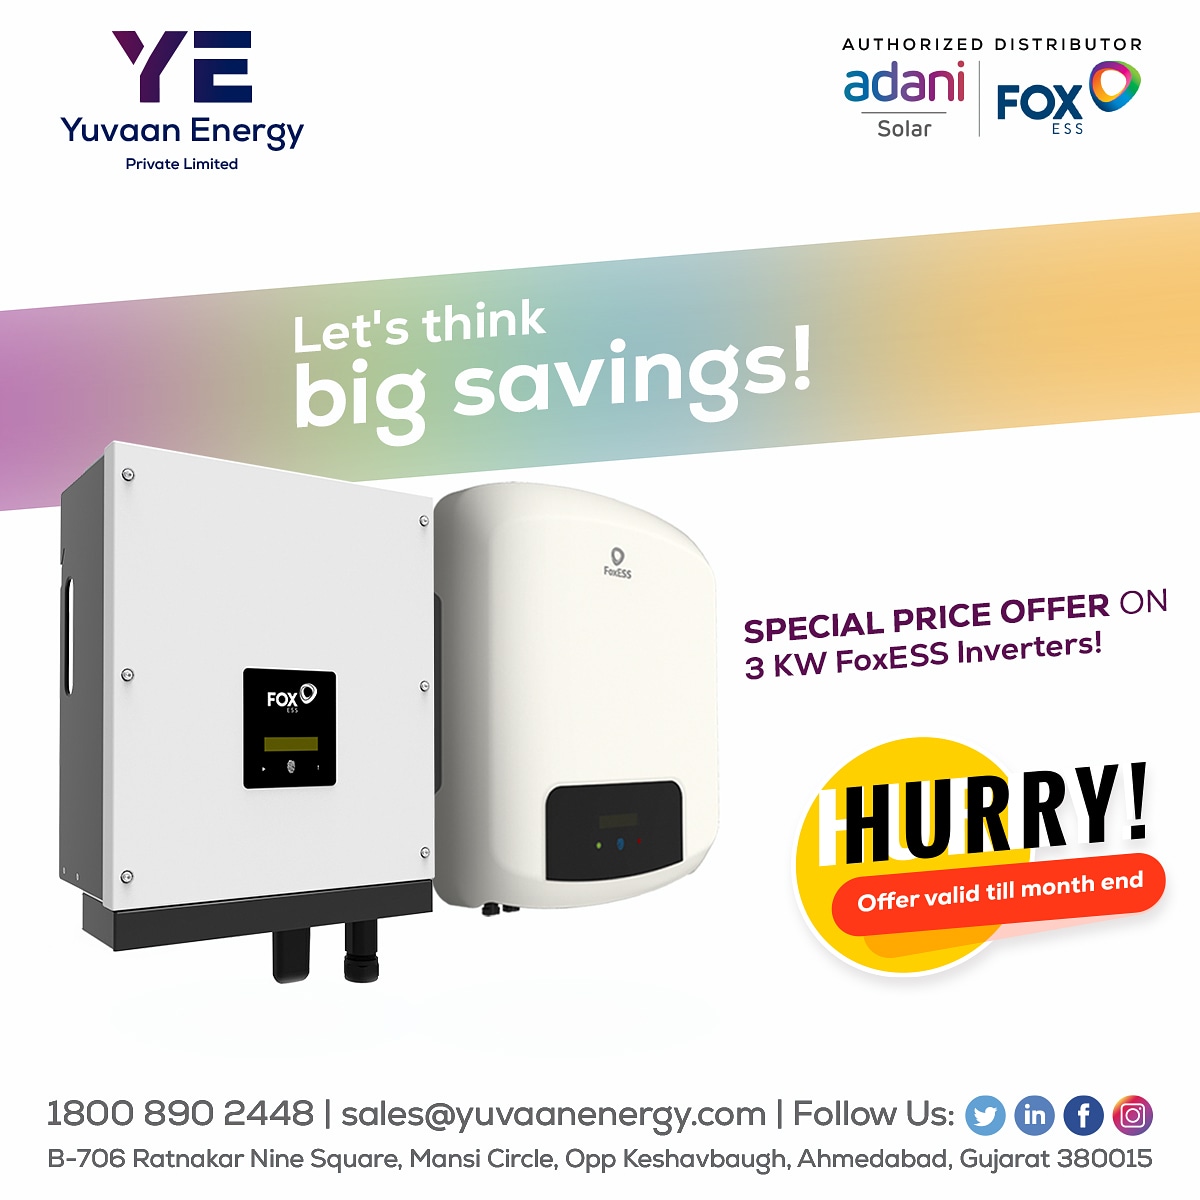 Let's think Big Savings now!

Get Special Price Offer on 3 KW FoxESS Inverters!

Hurry, Offer valid till month end only!

Call us to inquire more.

#yuvaanenergy #adanisolar #foxessinverter #specialpriceoffer #priceoffers #specialprice #solarinverters #inverters #invertersystems